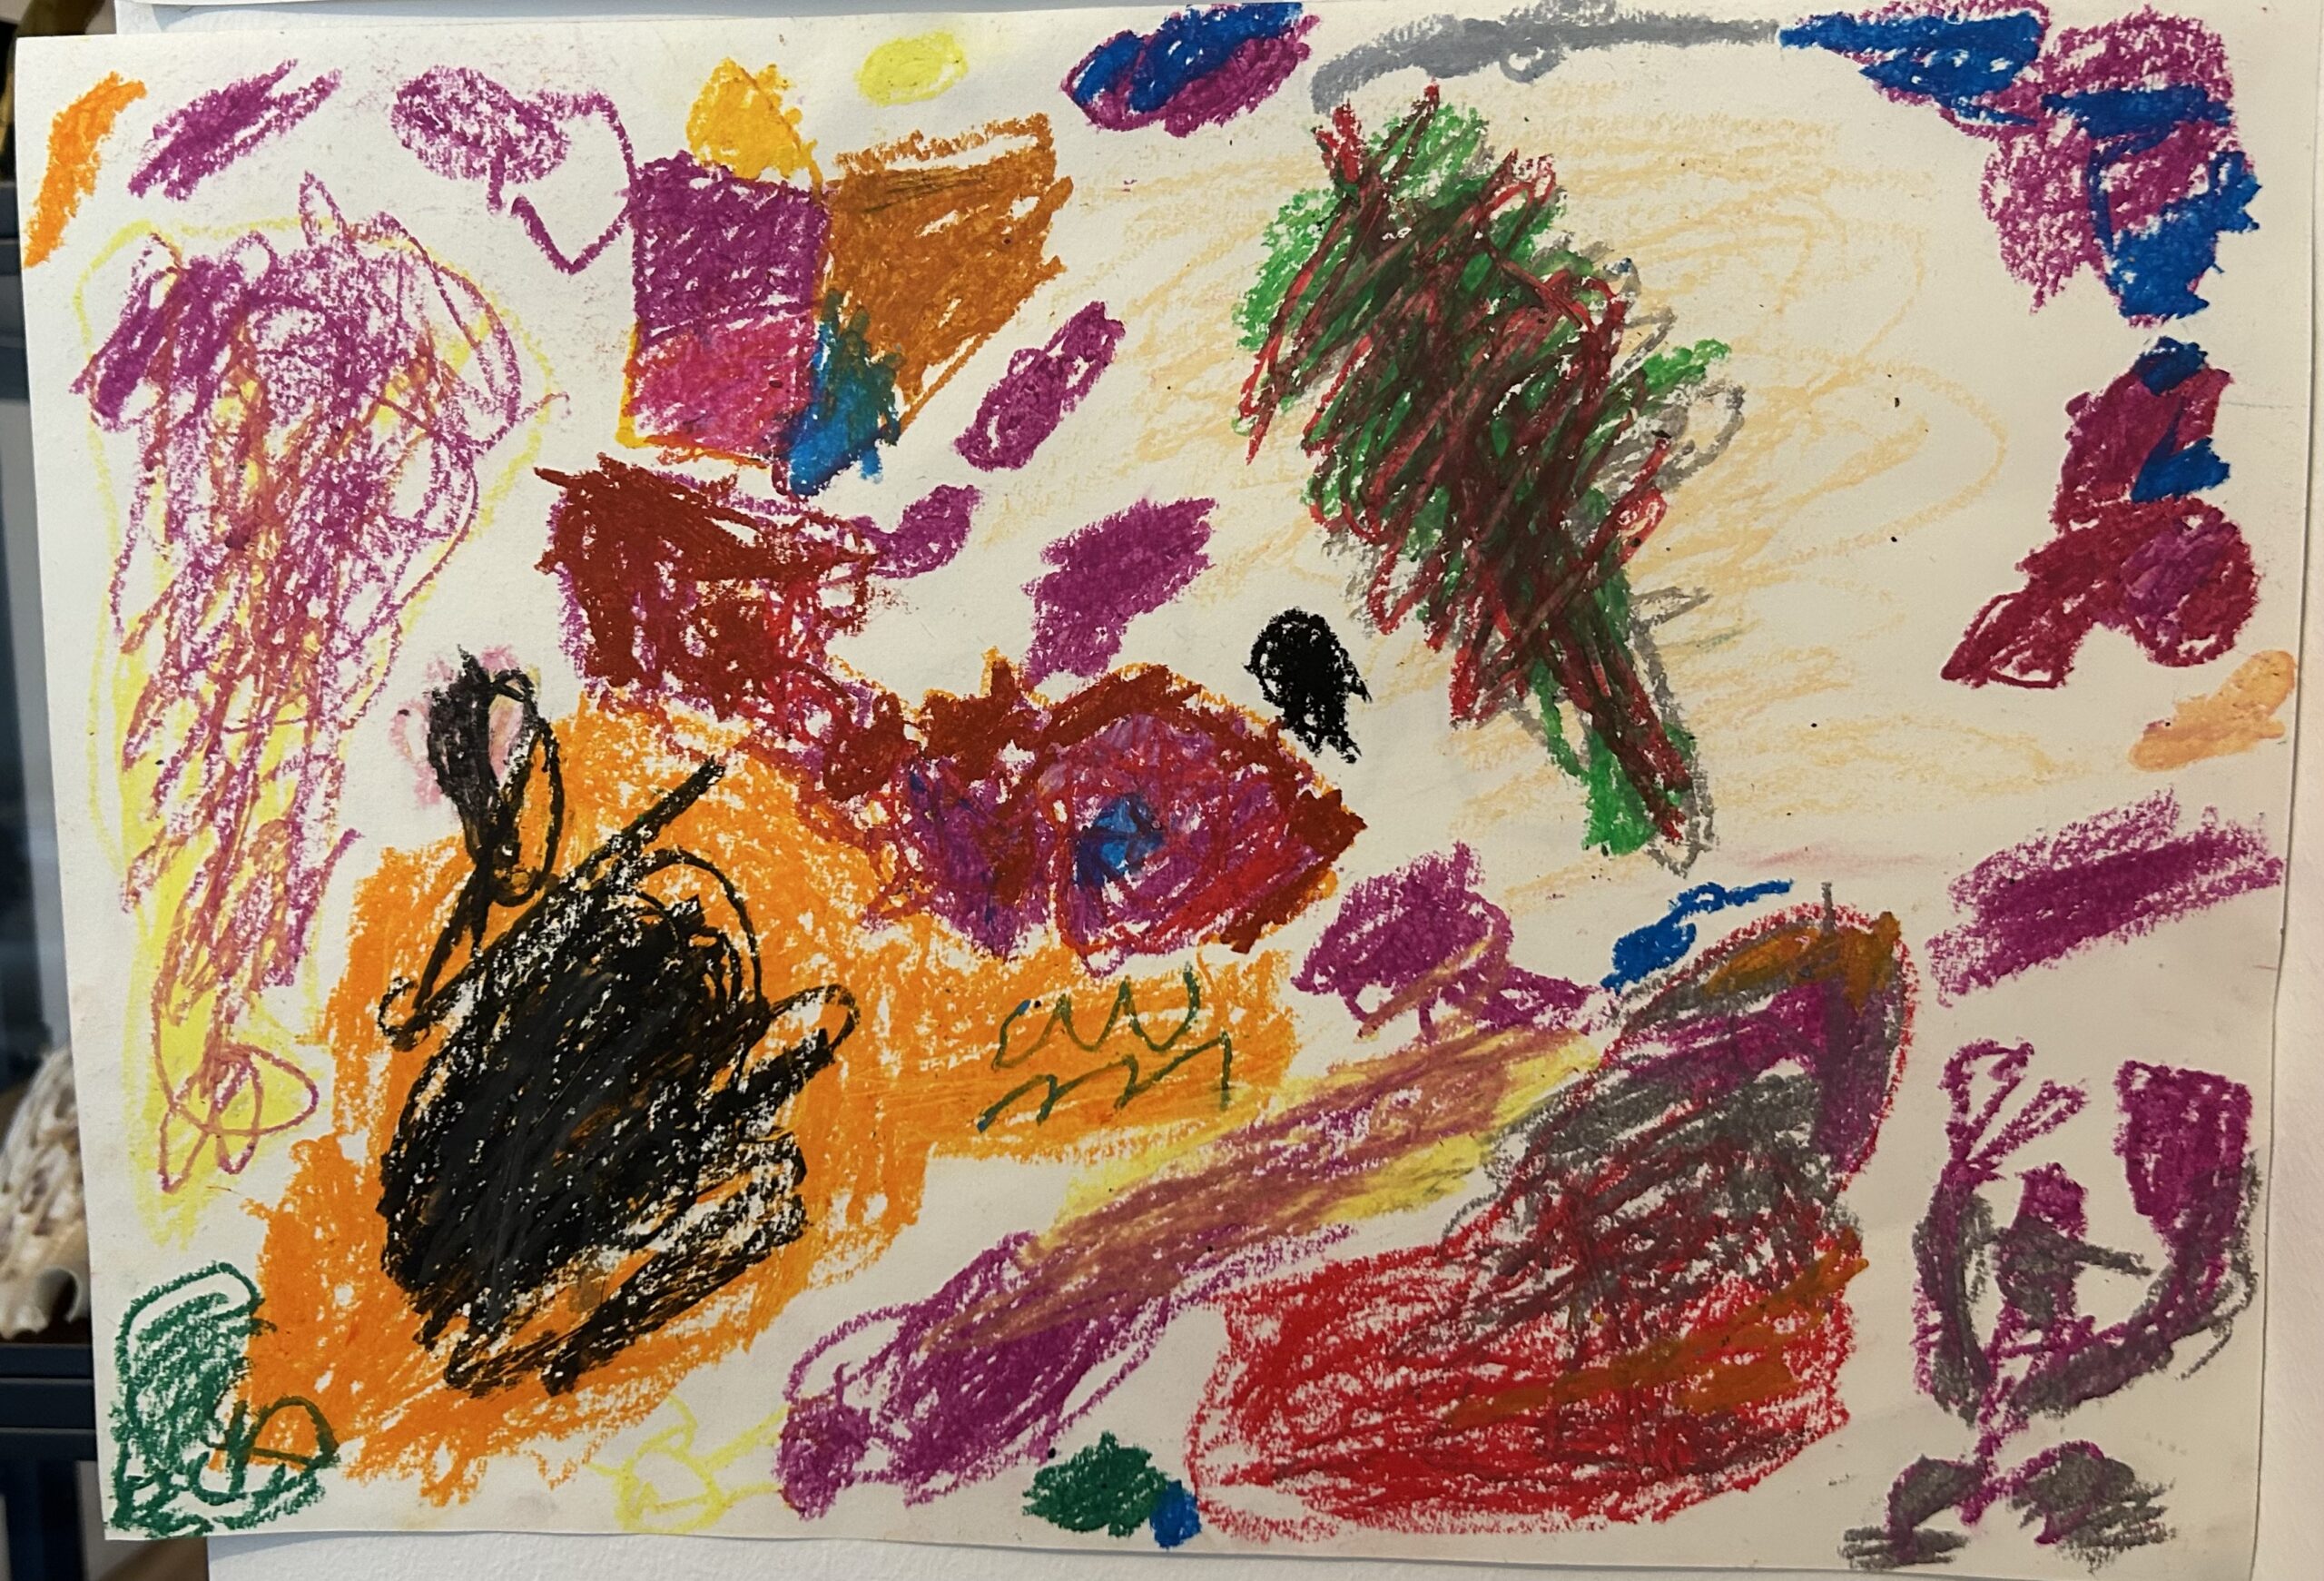 abstract multiple color art work, crayon and pastels on paper, made by a child